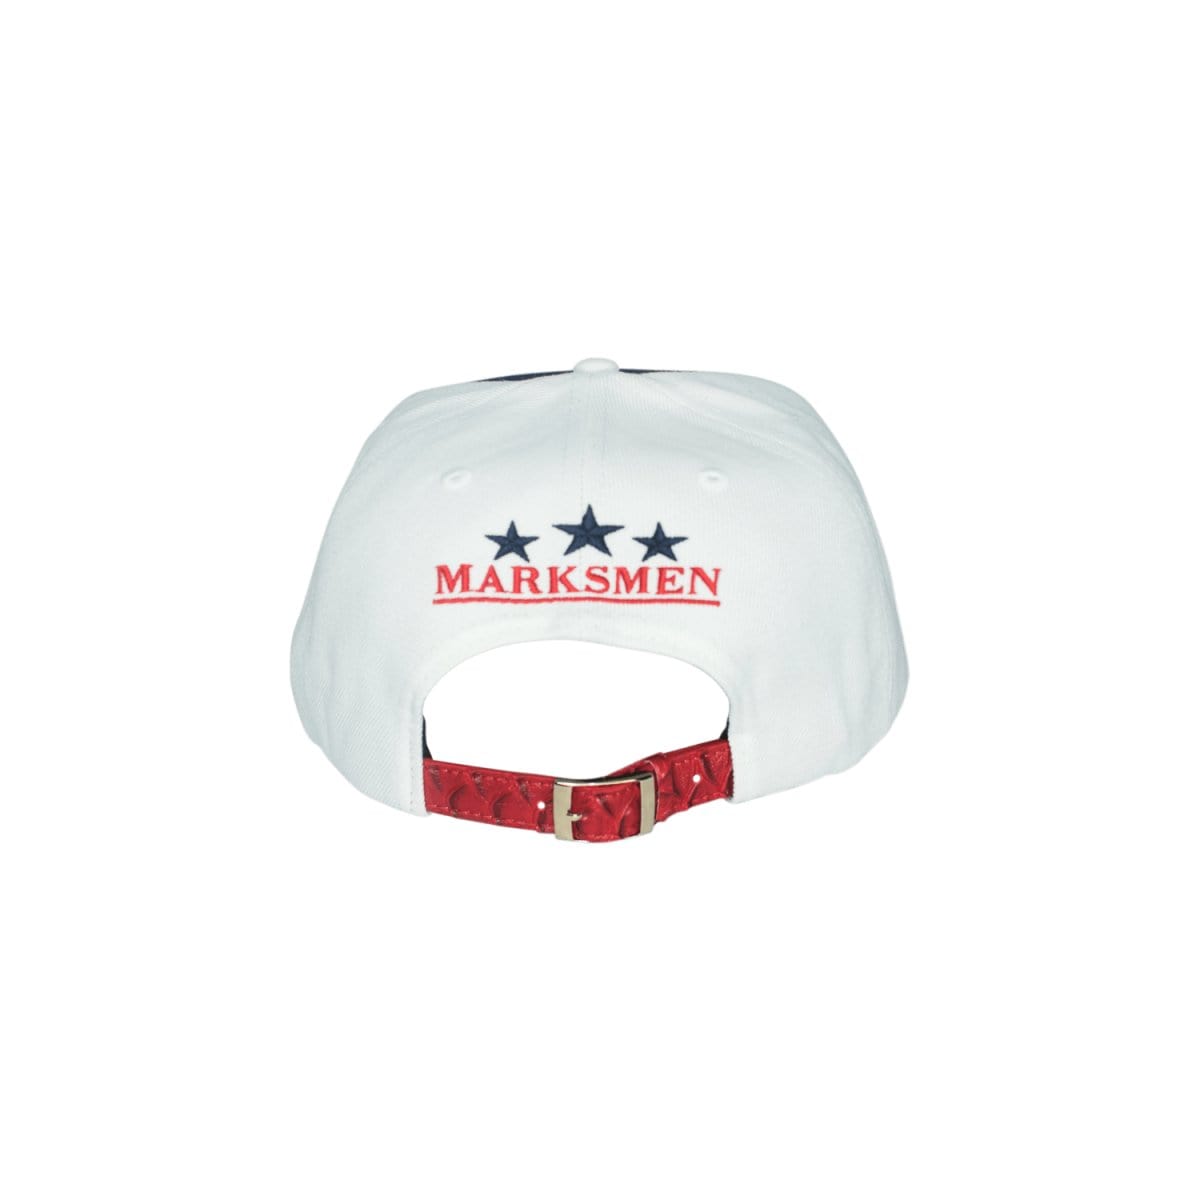 J.Hinton Collections Apparel & Accessories The Marksmen Vintage Cap (Navy/Red)